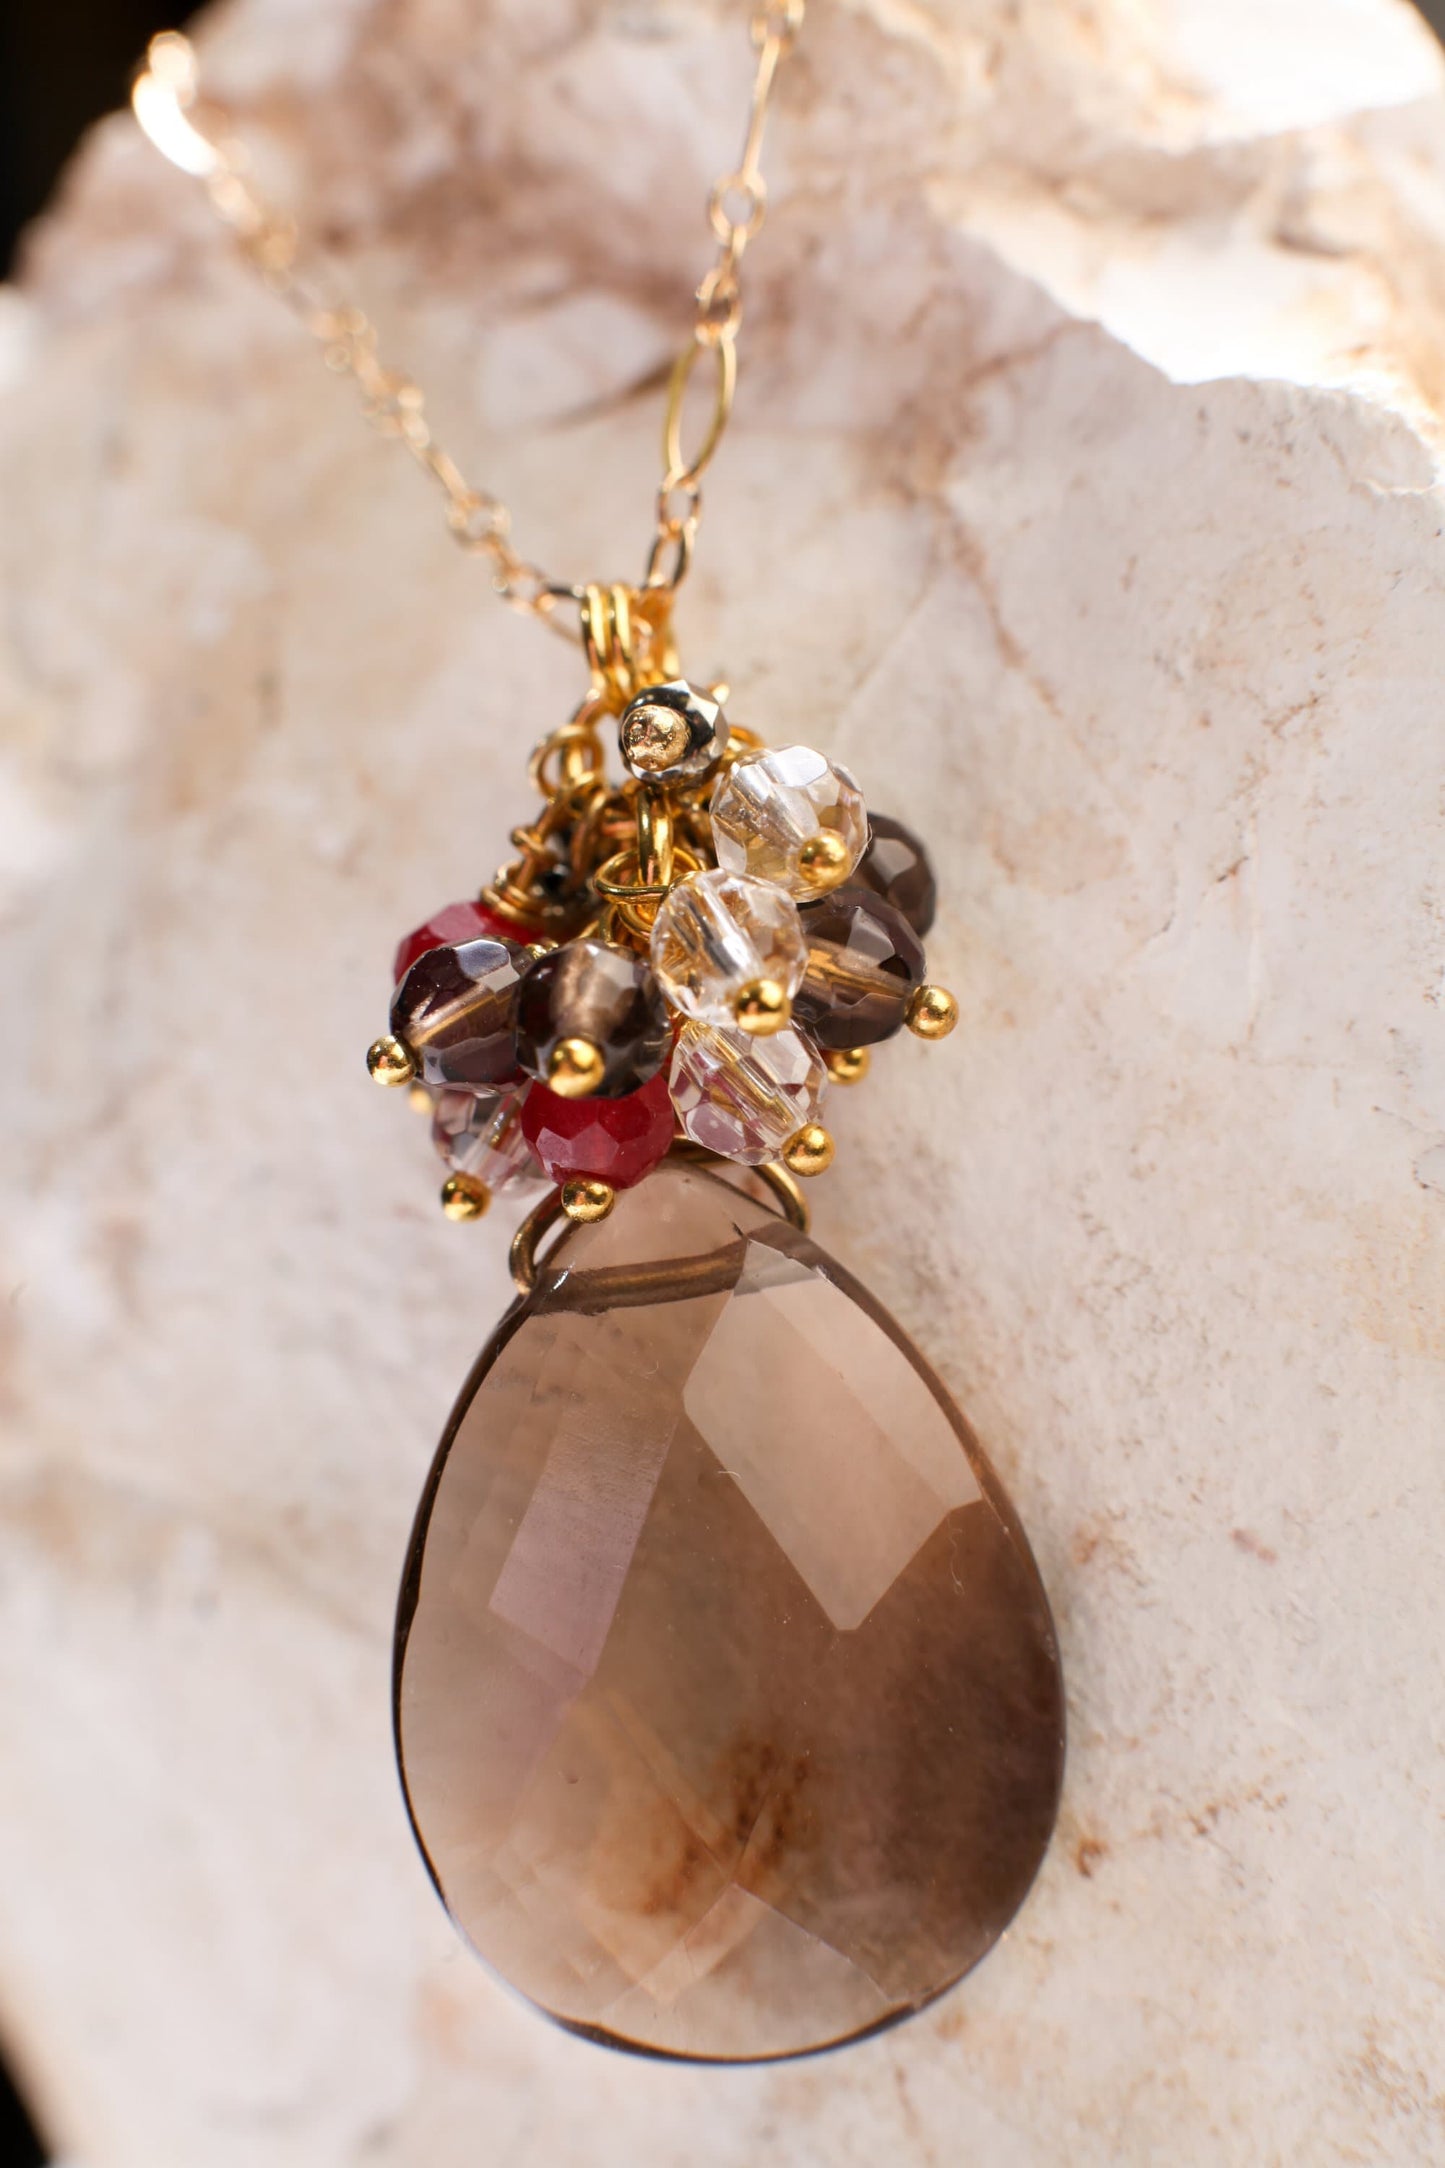 Smokey Quartz Faceted Pear Drop 18x25mm Pendant, Smokey Qz, Rock Crystal,Ruby Jade Clusters Wire Wrapped,14K Gold Filled Chain 18&quot; Necklace